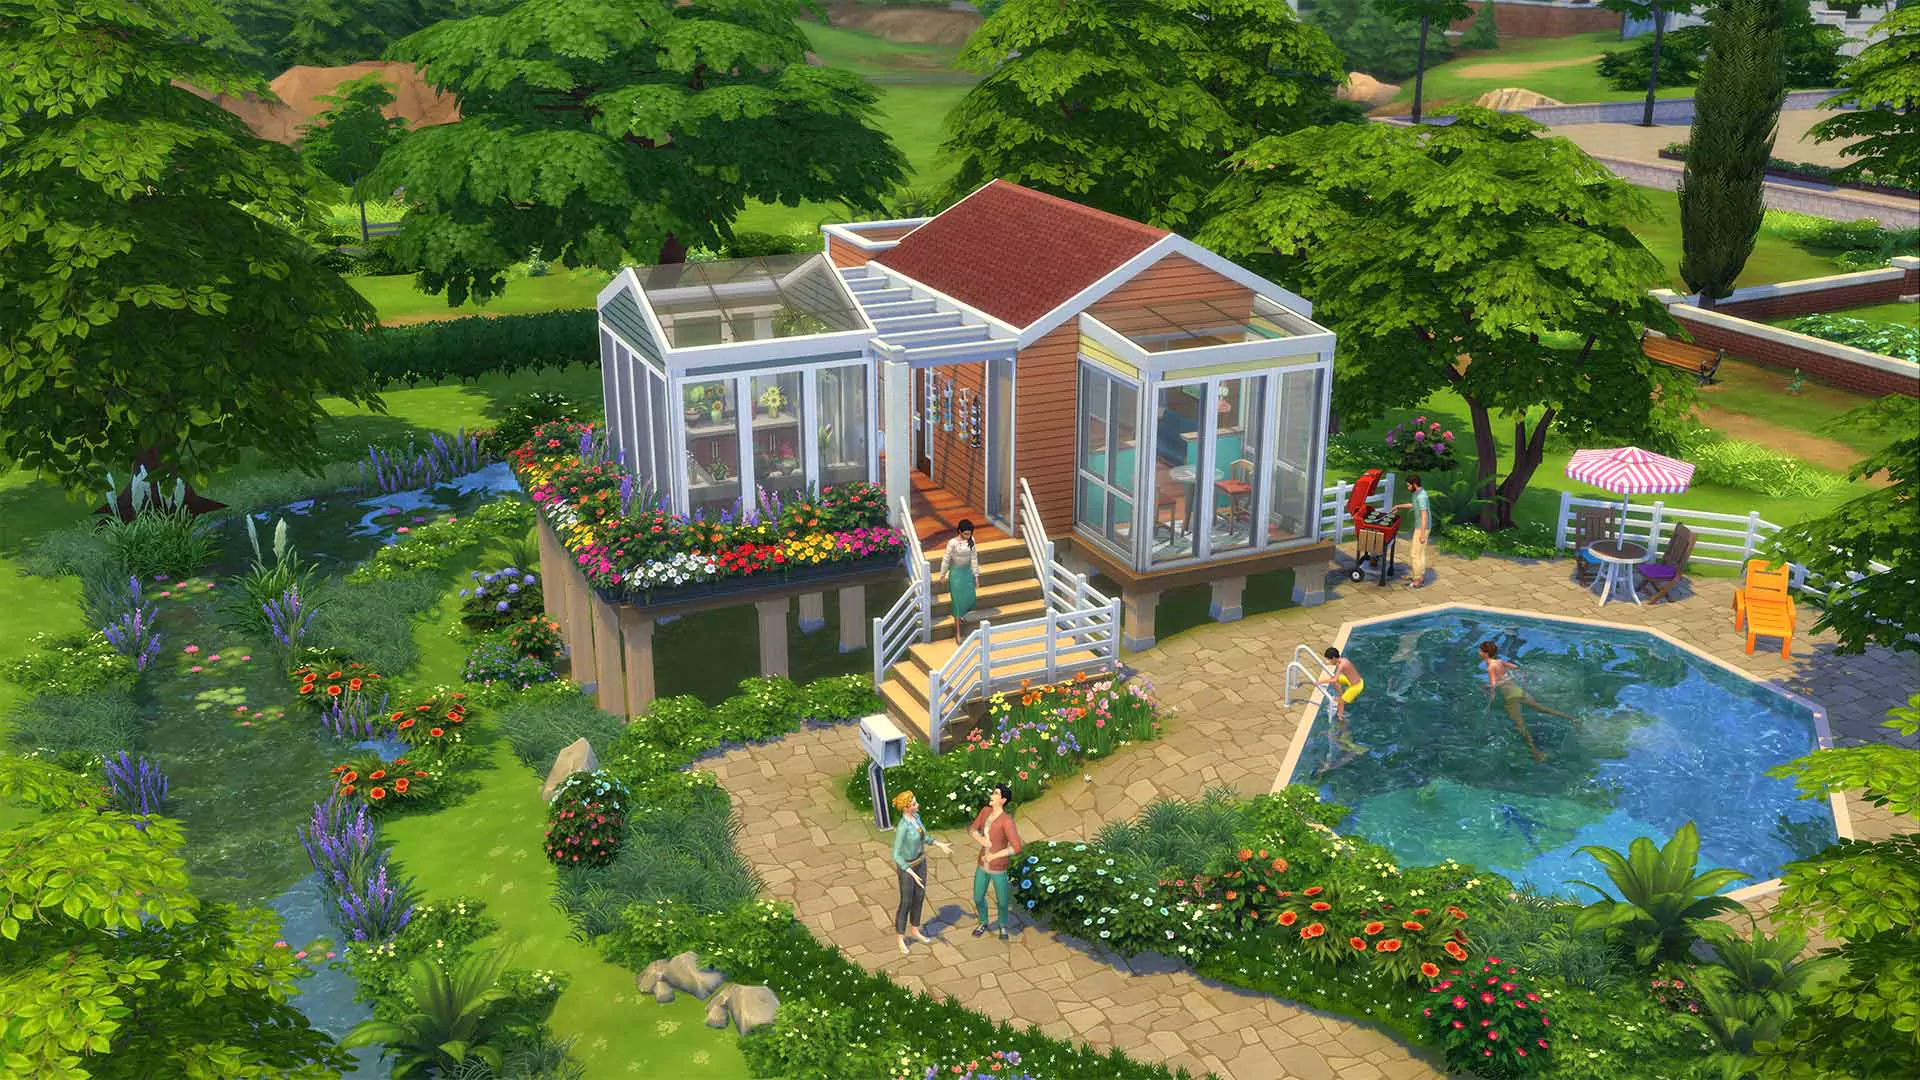 The Sims 4 Tiny Living Update Only [From 1.60.54.1020] - The Sim Architect